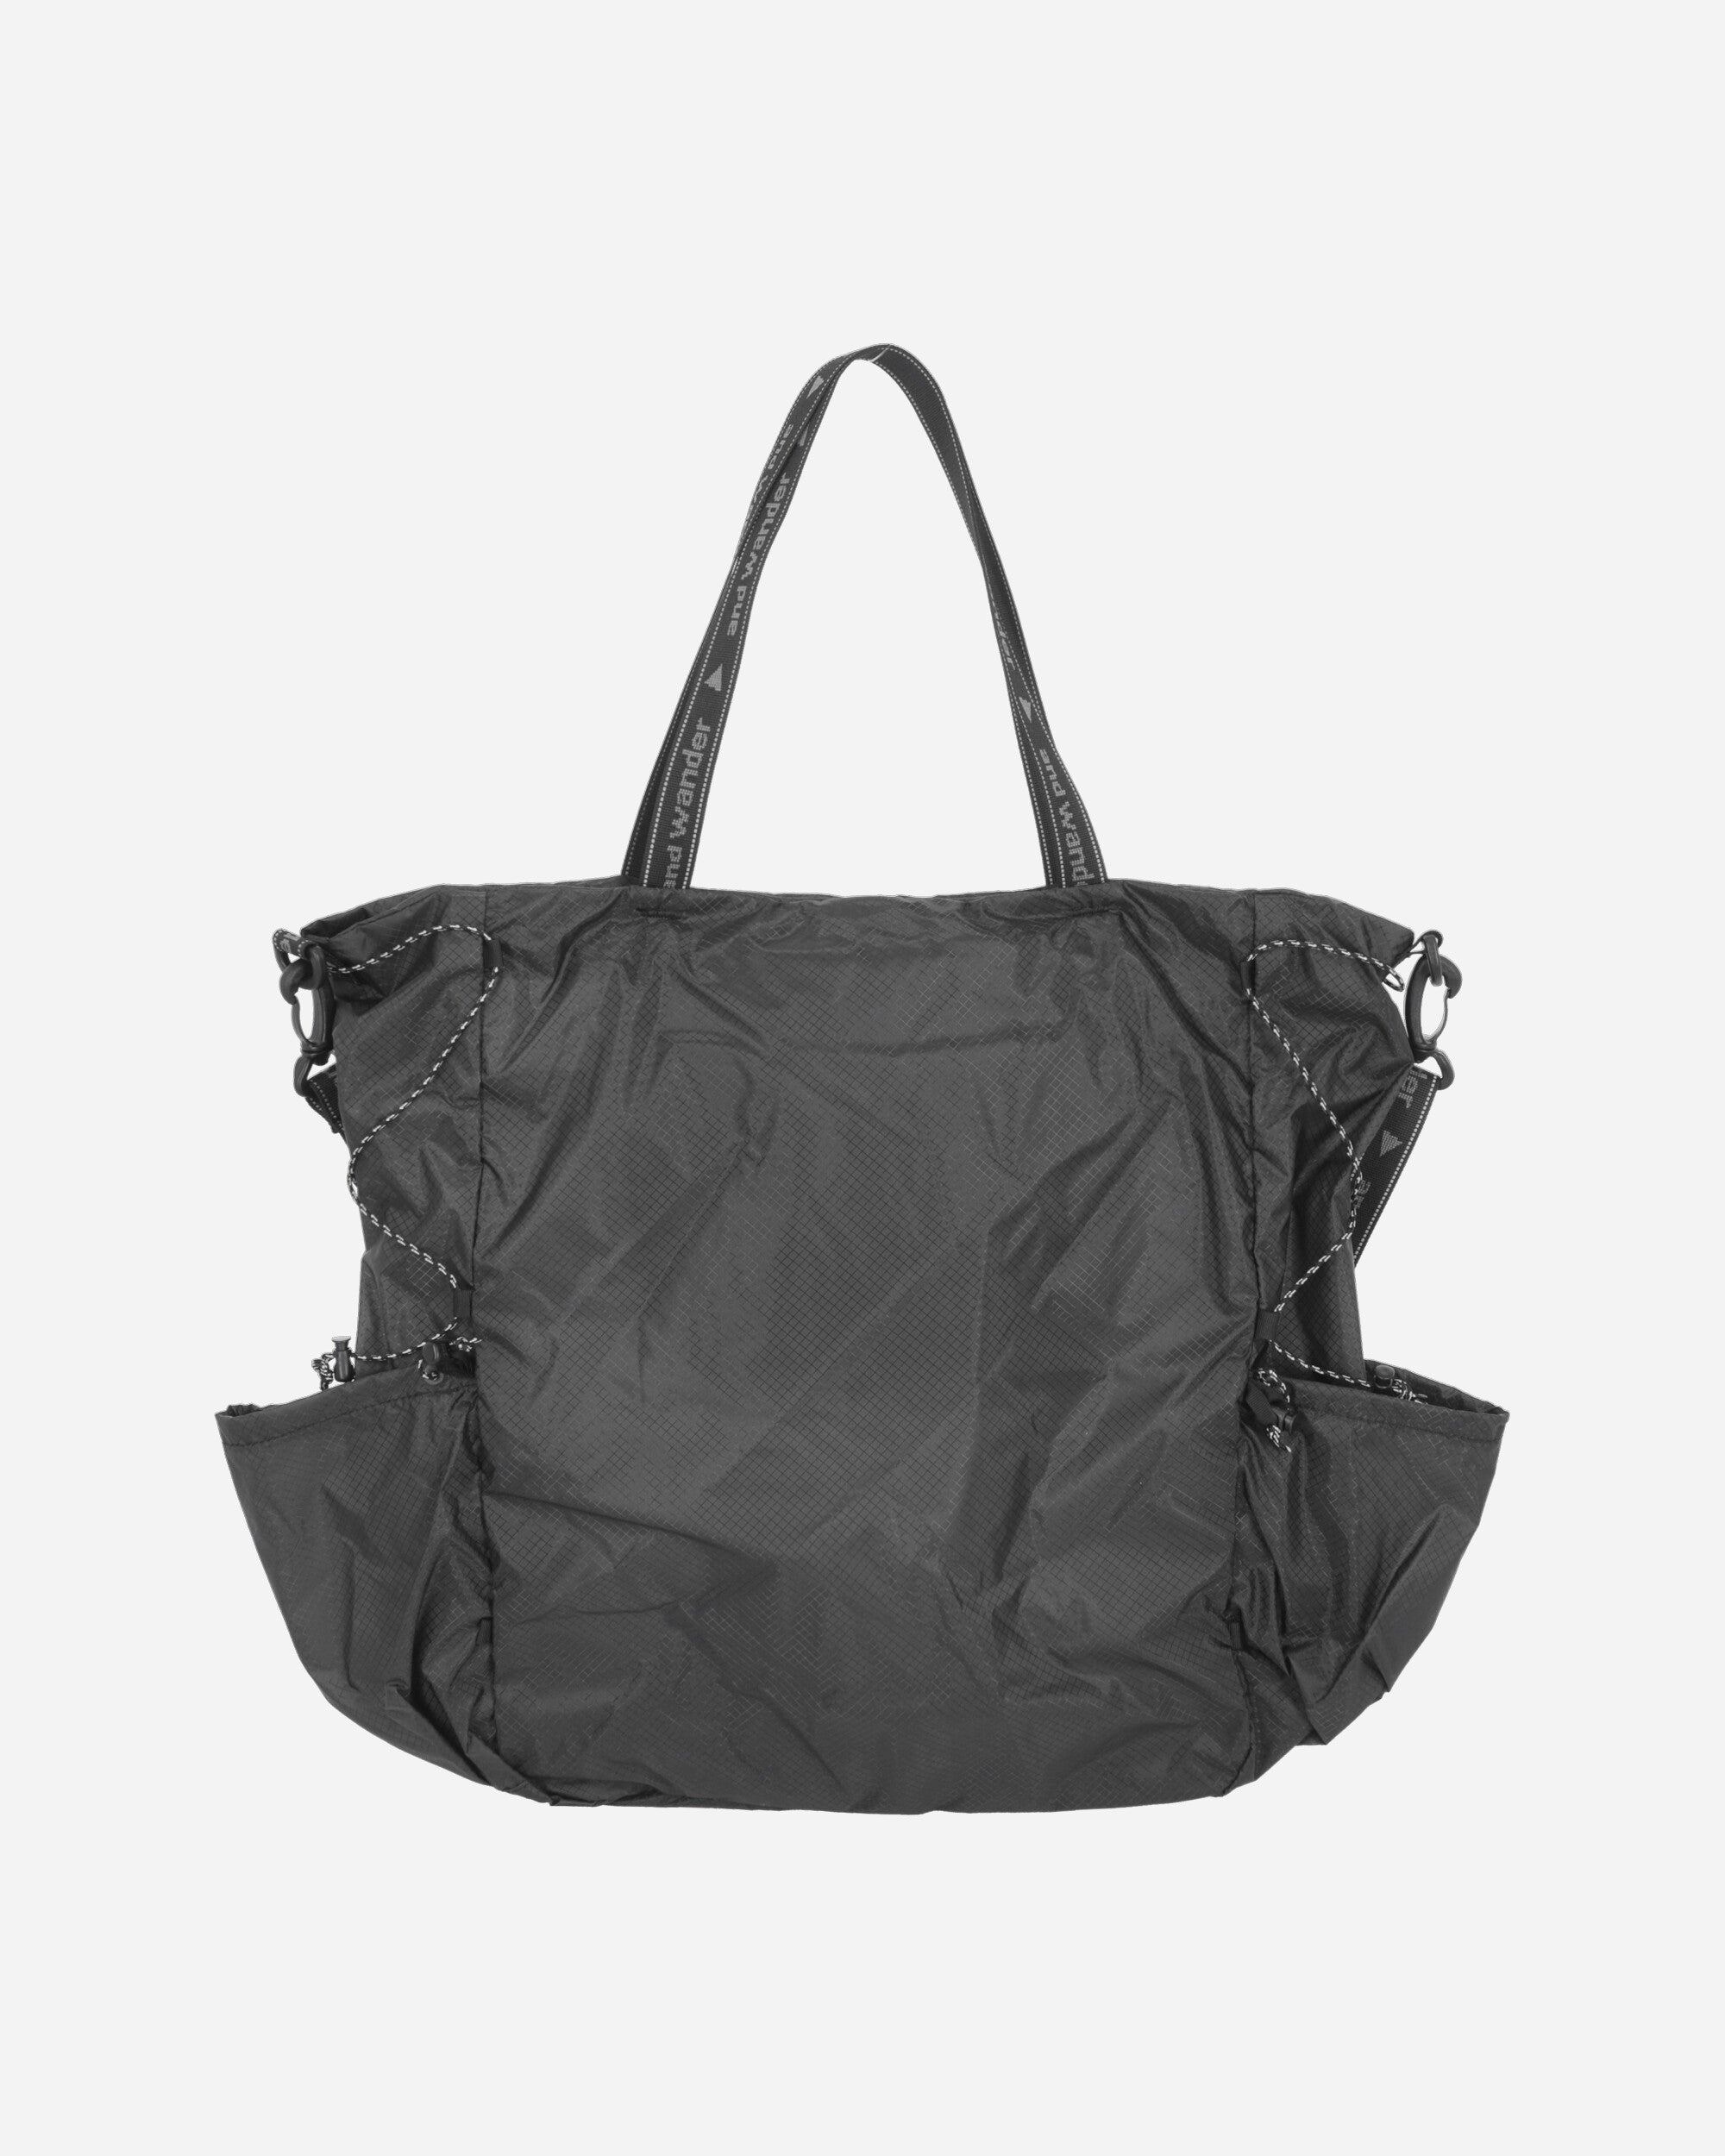 and wander Sil Tote Bag Charcoal Bags and Backpacks Tote Bags 5744975200 022